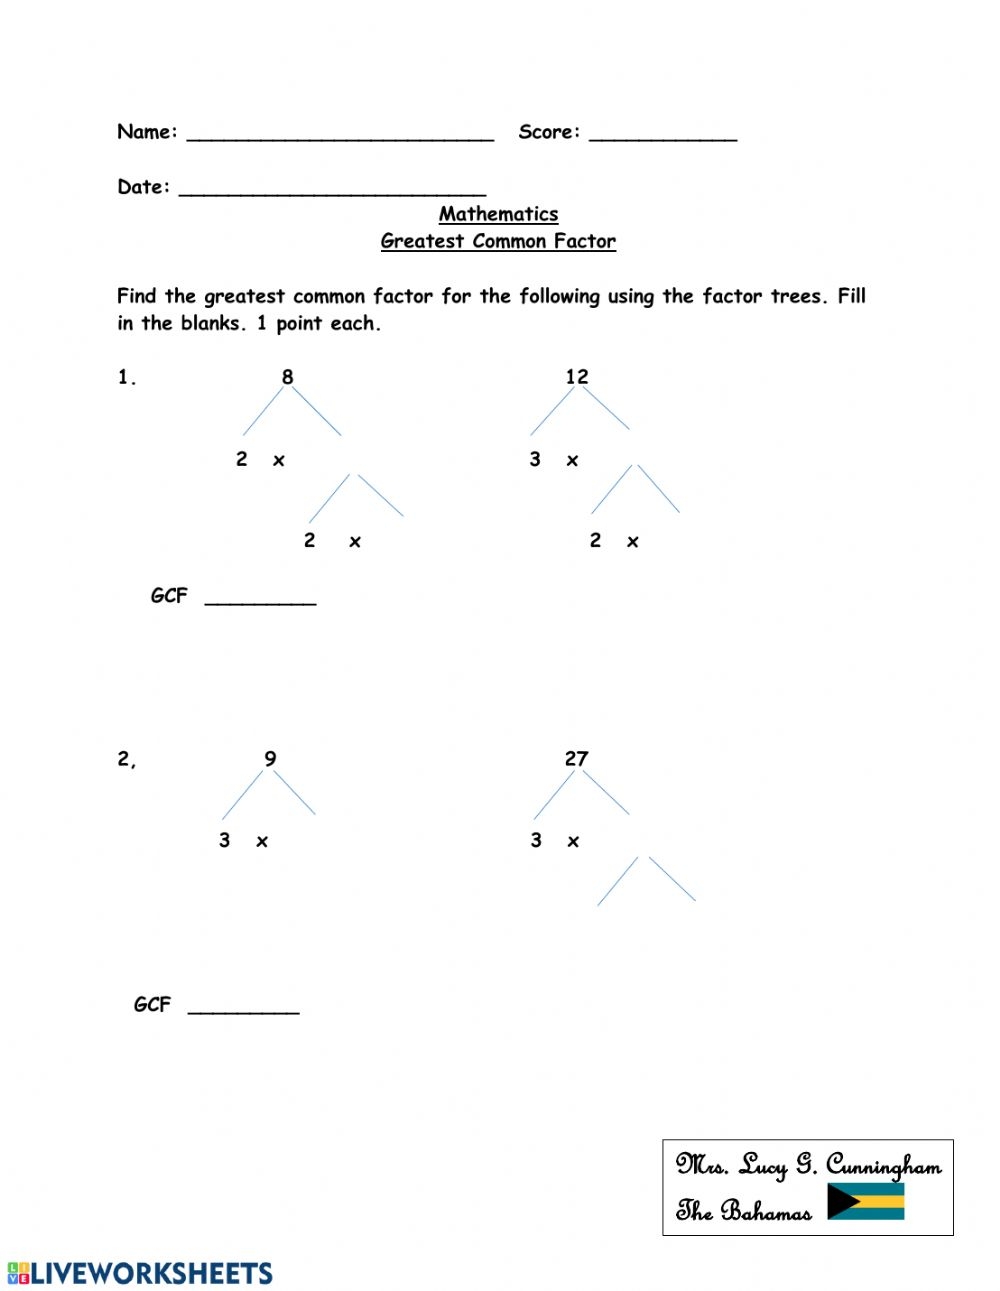 greatest-common-factor-worksheet-math-worksheet-answers